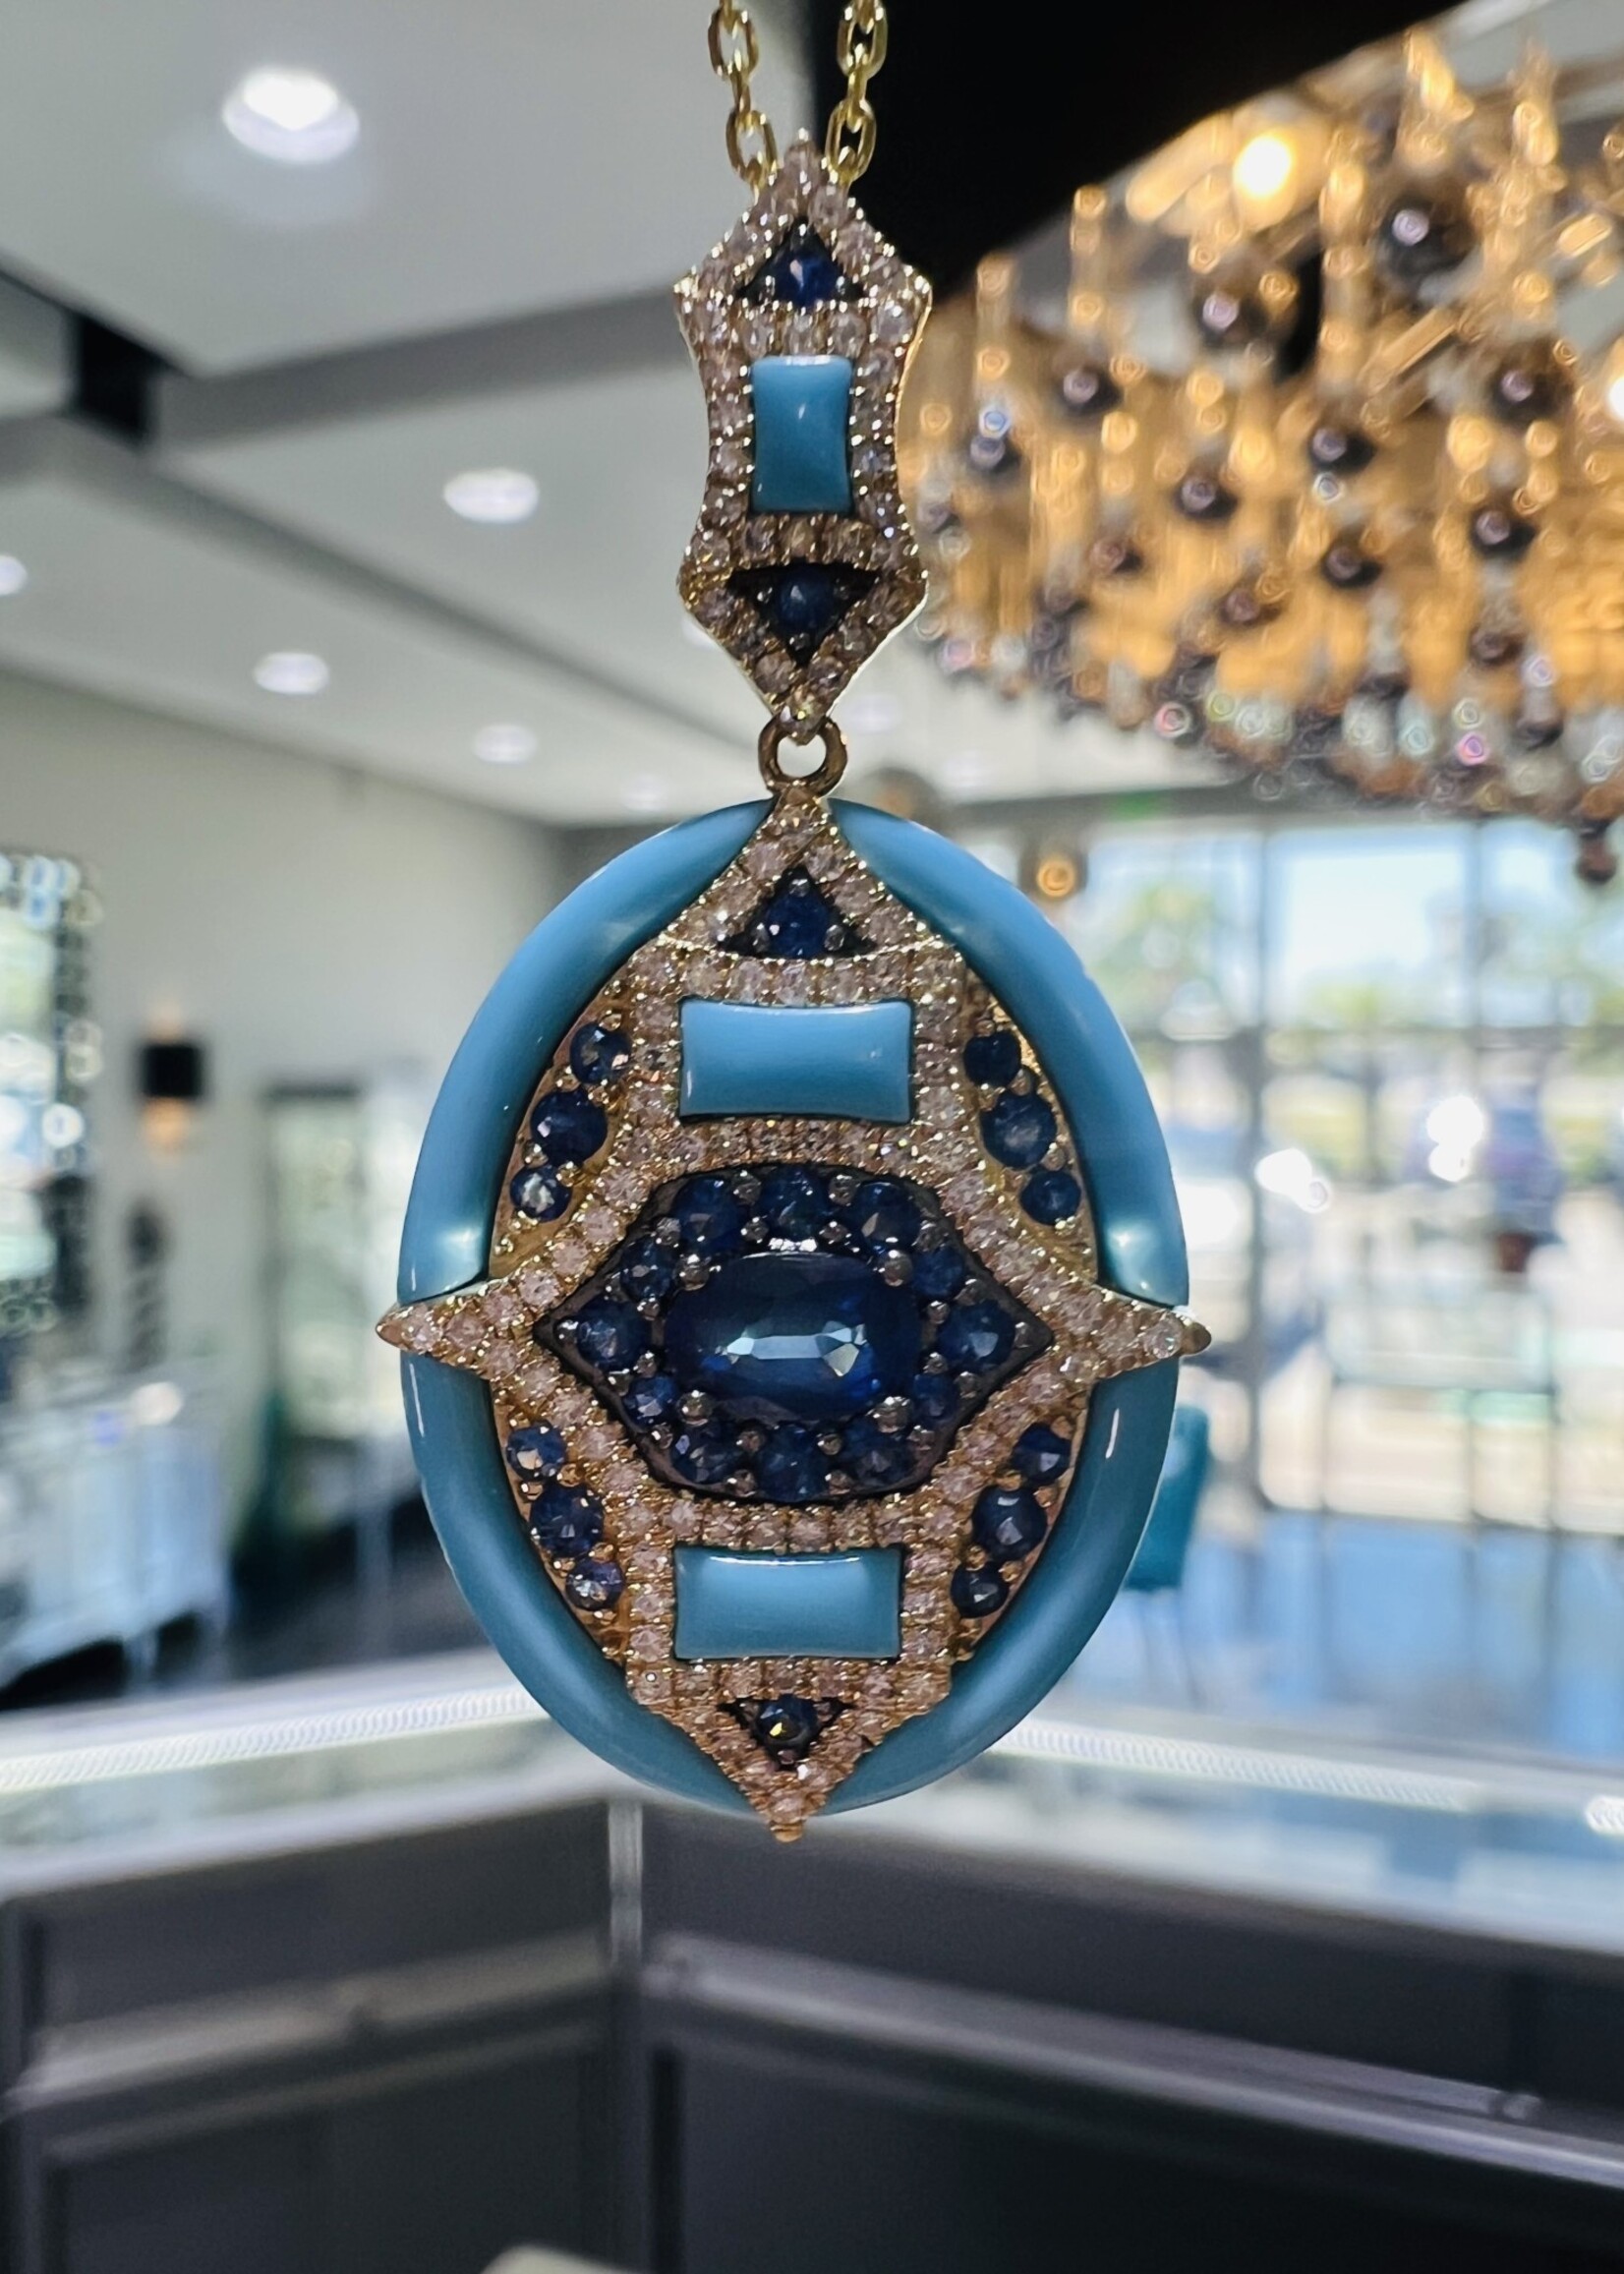 Shula NY 14kY .37carat Diamonds, 1.35ct Sapphires, and Turquoise.